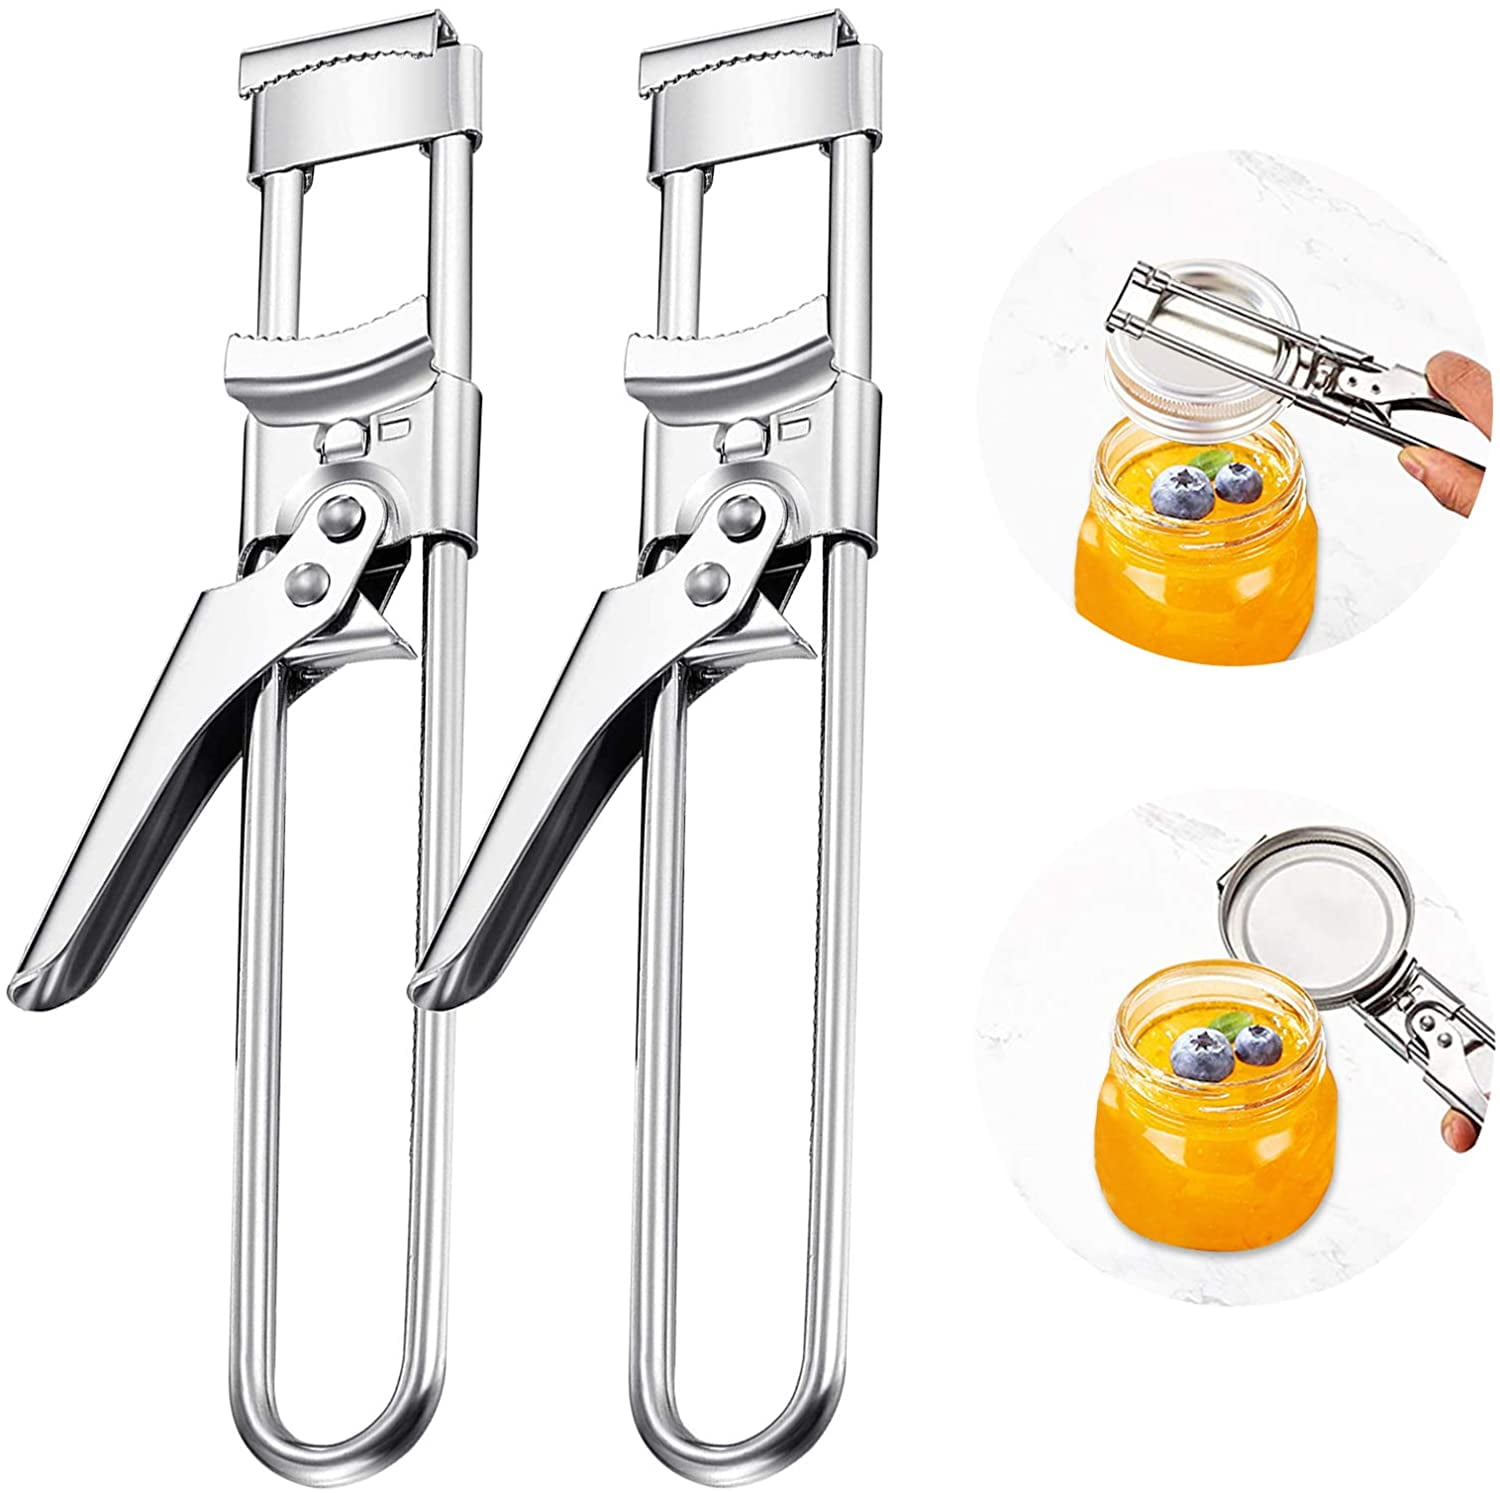 Jar Opener Adjustable Stainless Steel Can Openers Manual Bottle Lids Off Cover Remover Tin Gripper Easily Opens